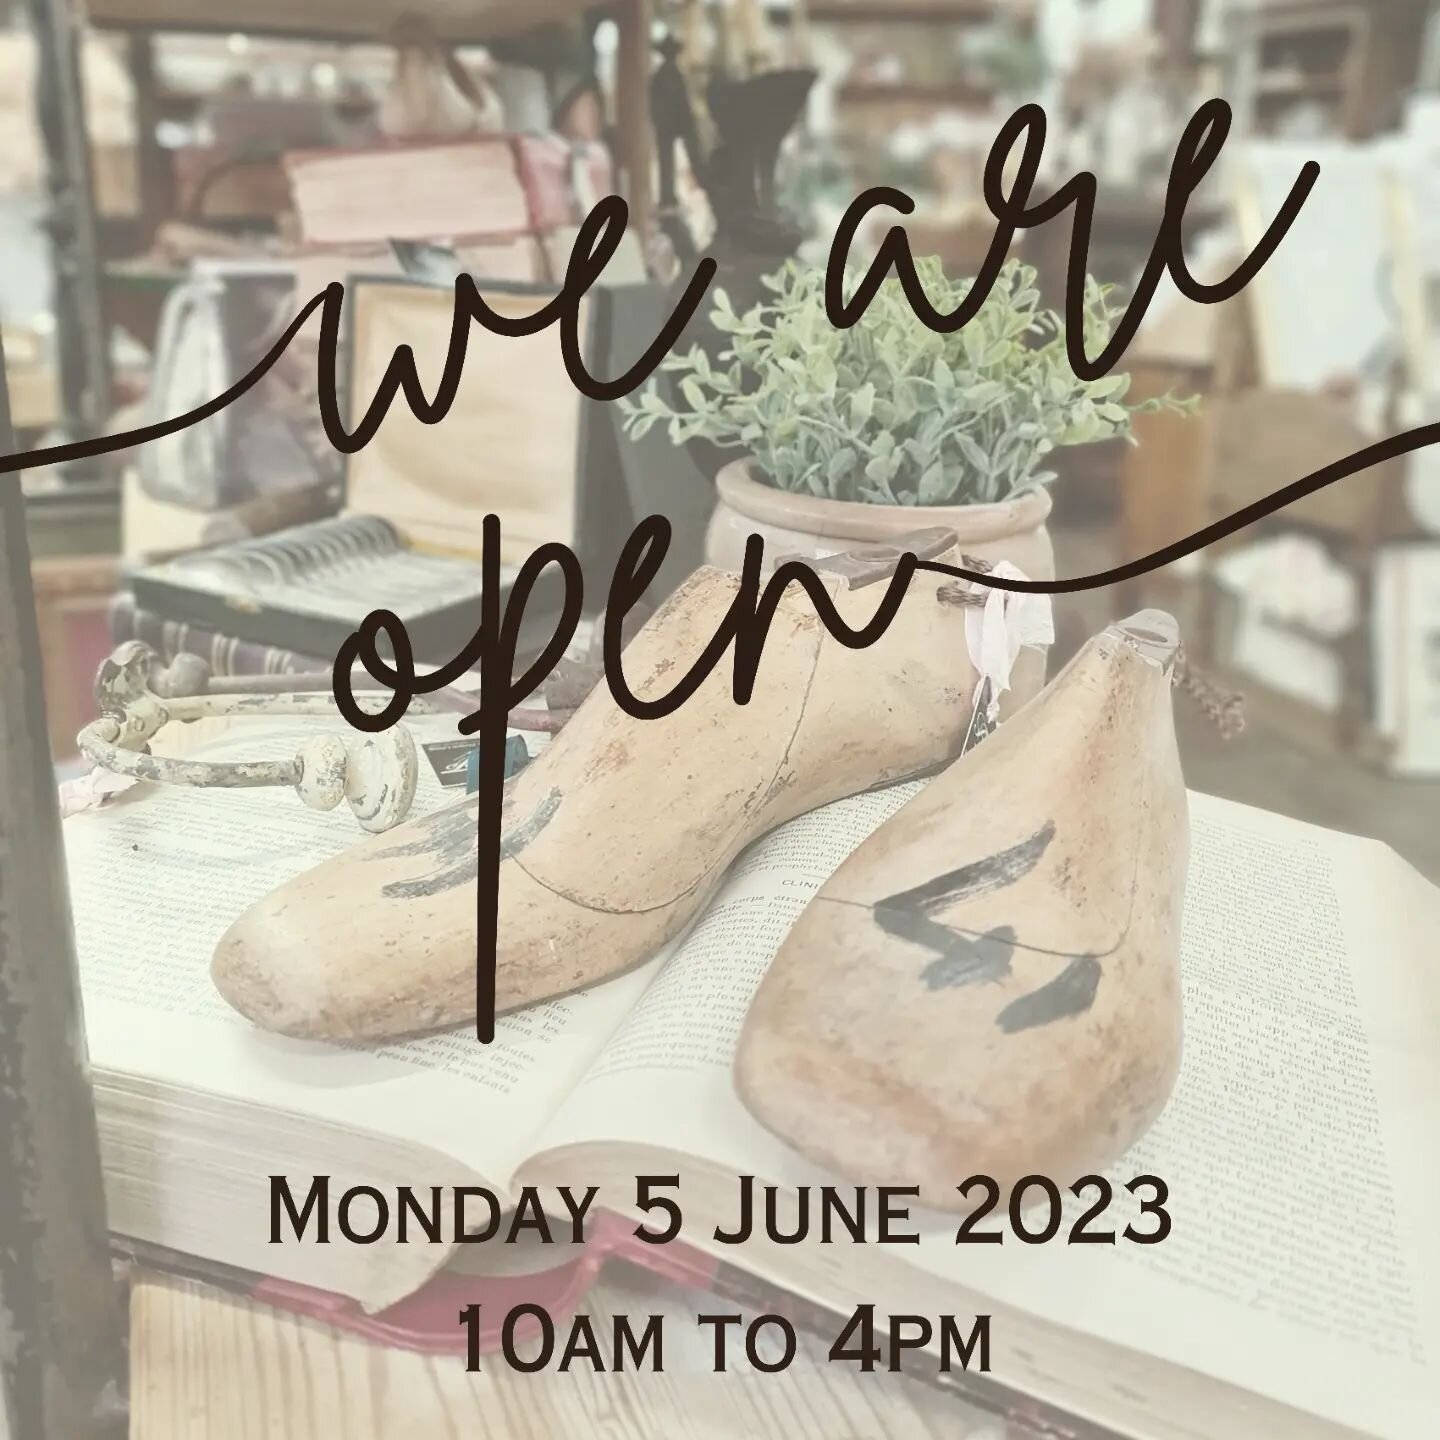 We are open Monday from 10am to 4pm! Come in for a warm coffee and a browse🌸